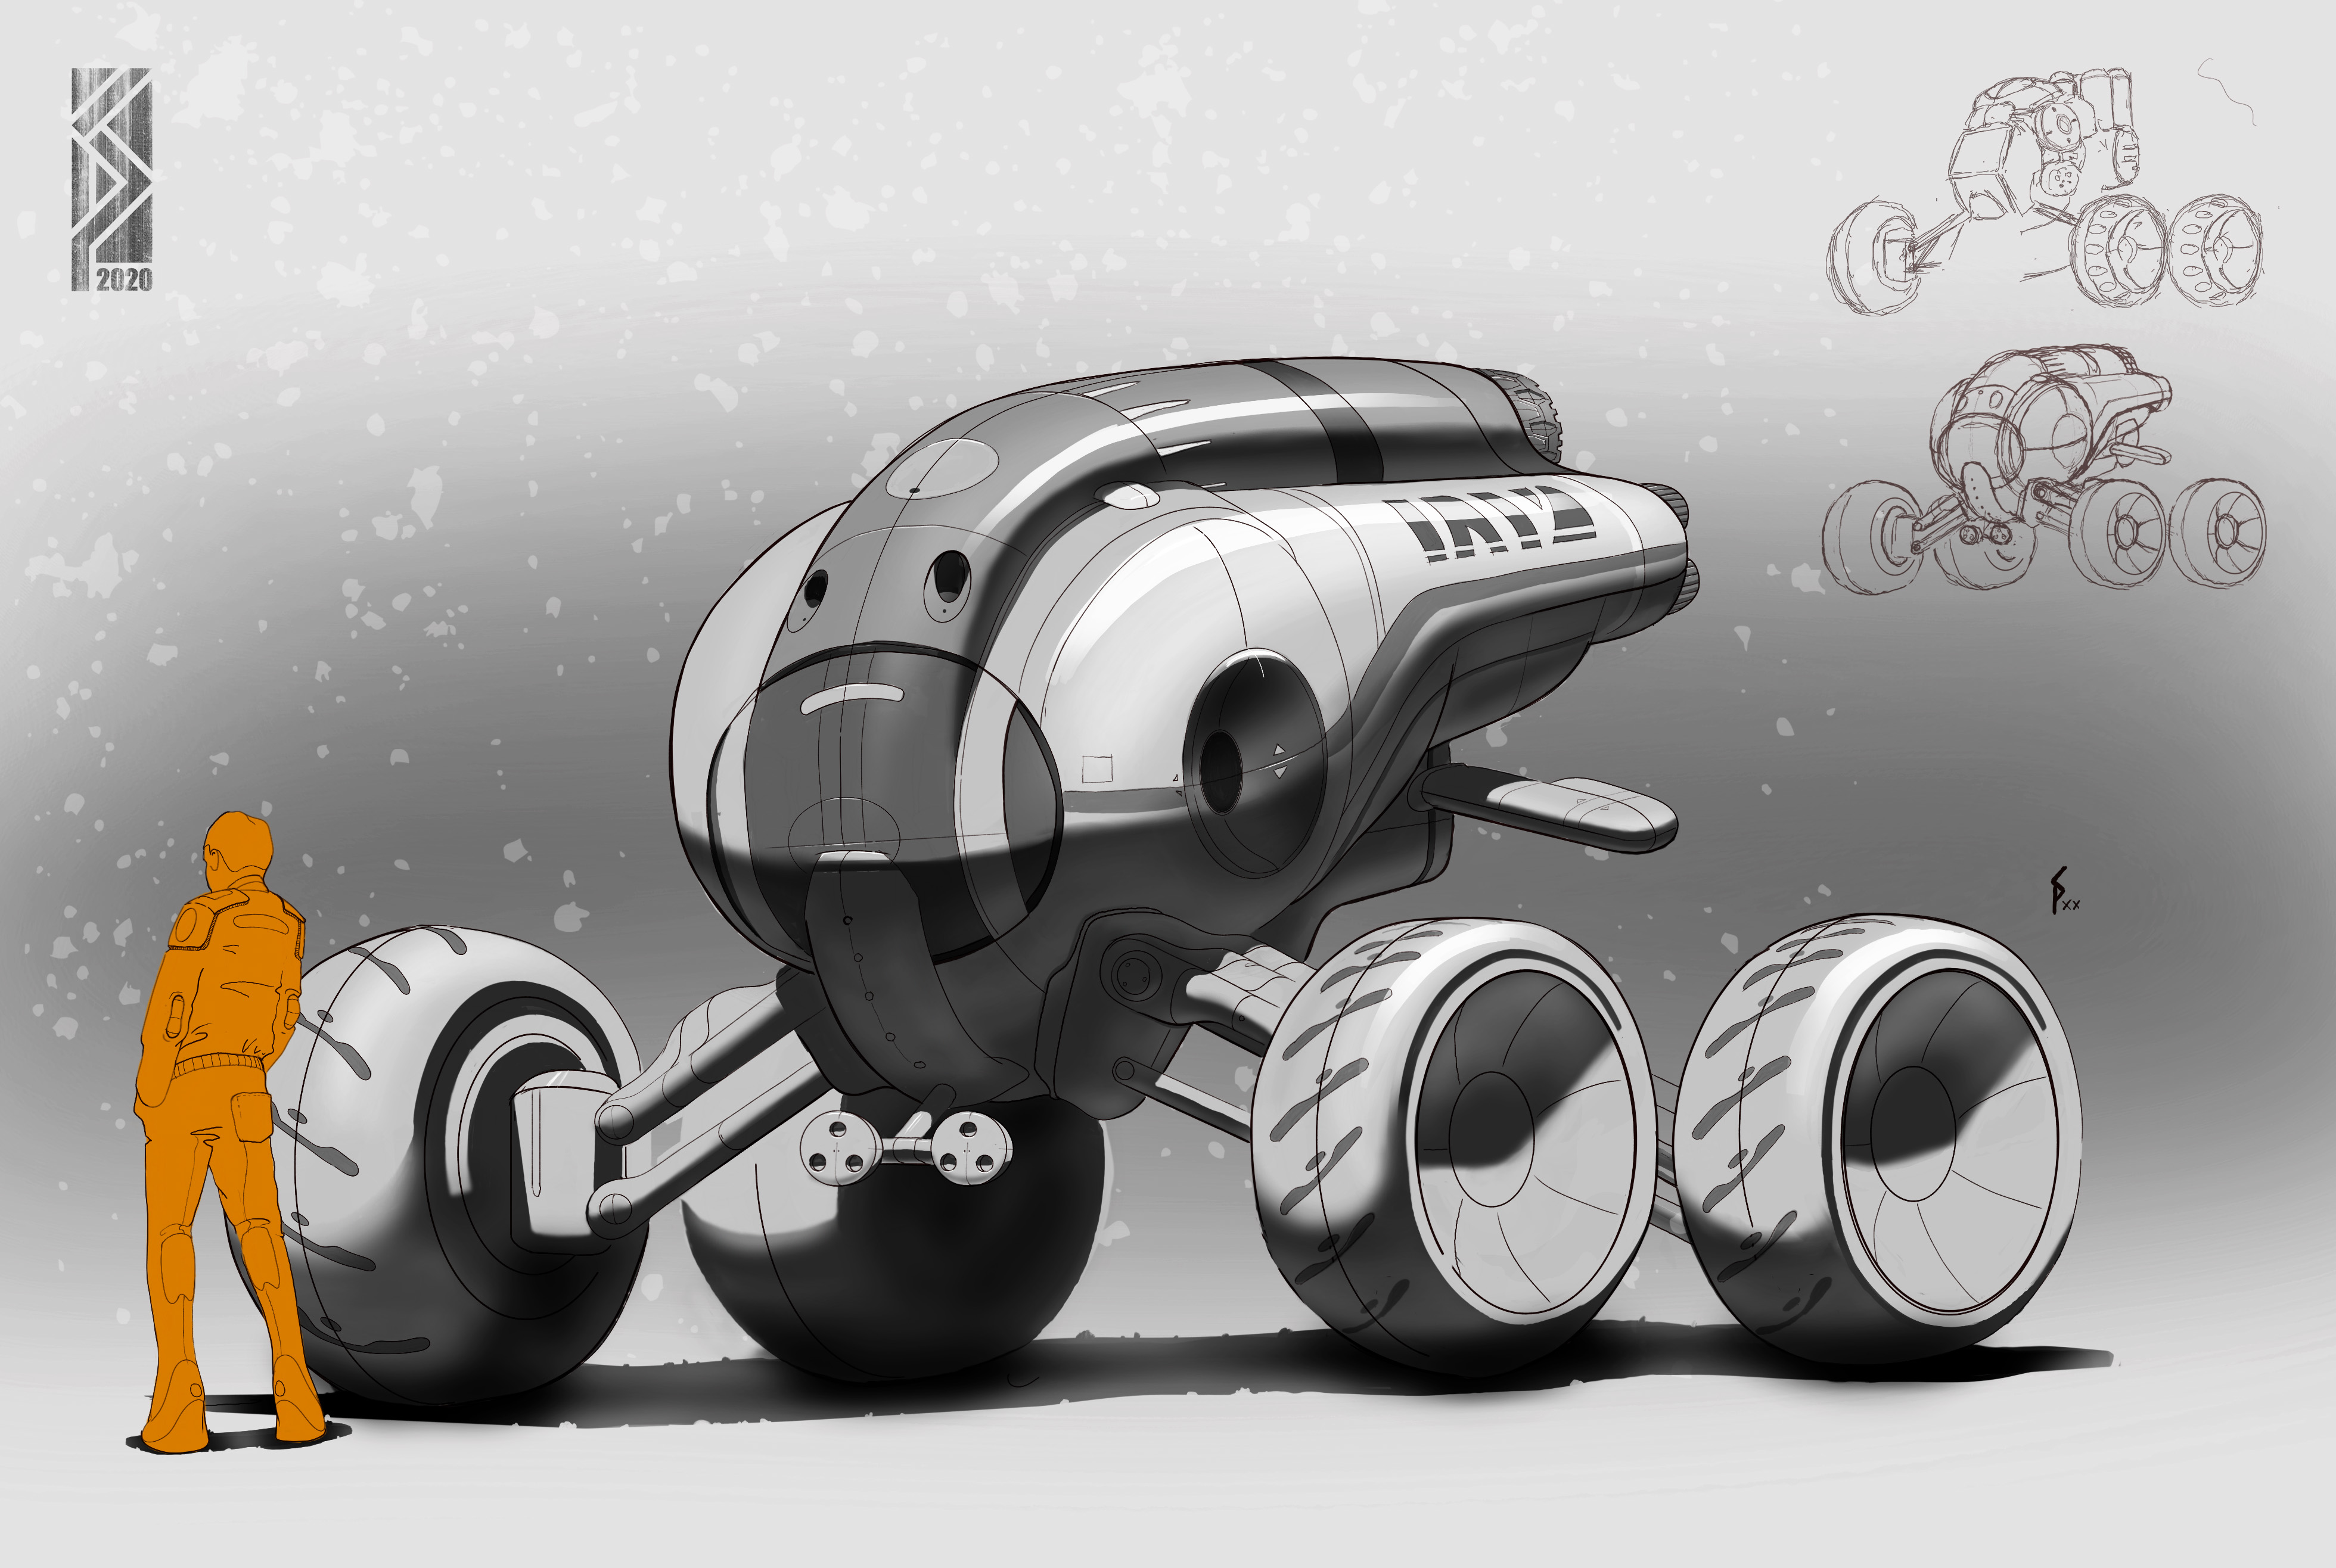 Exploration Vehicle - Peter from xoio